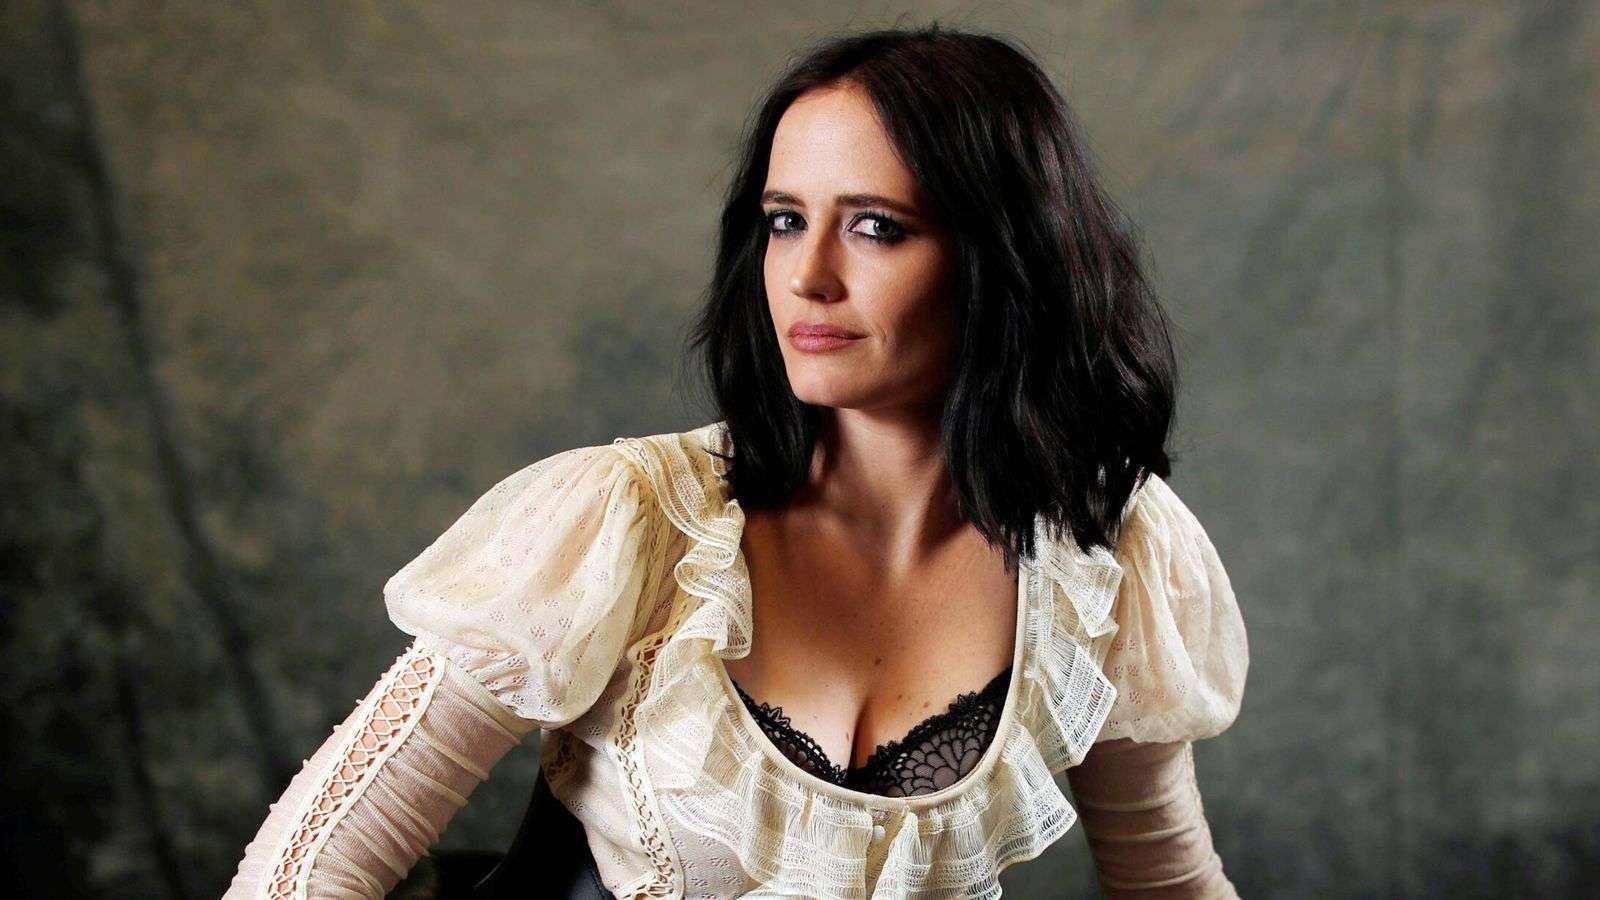 Eva Green Biography: Movies and TV Shows, Husband, Net Worth, Age, Parents, Instagram, Family